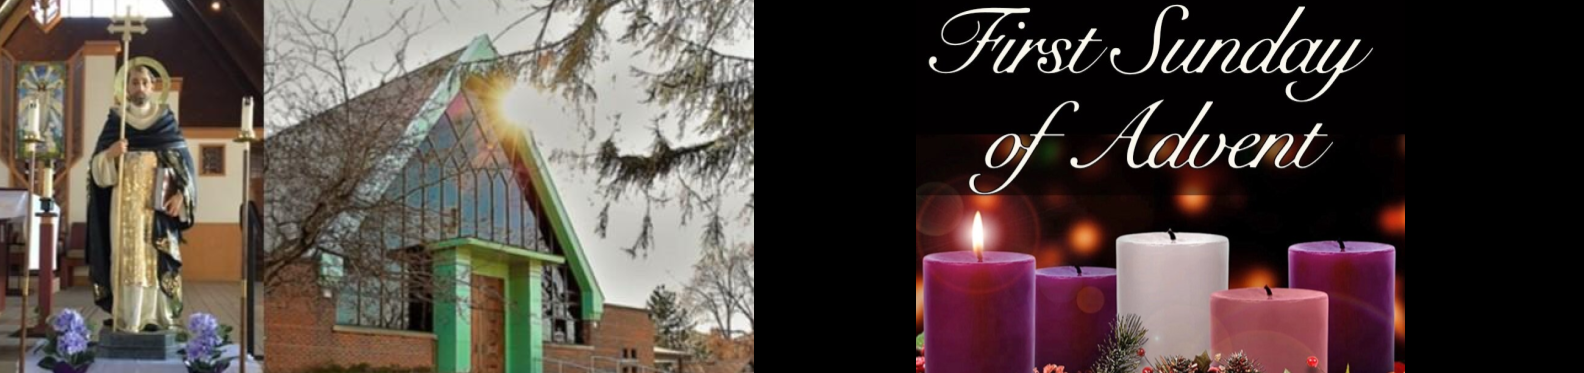 First Sunday in Advent November 28, 2021